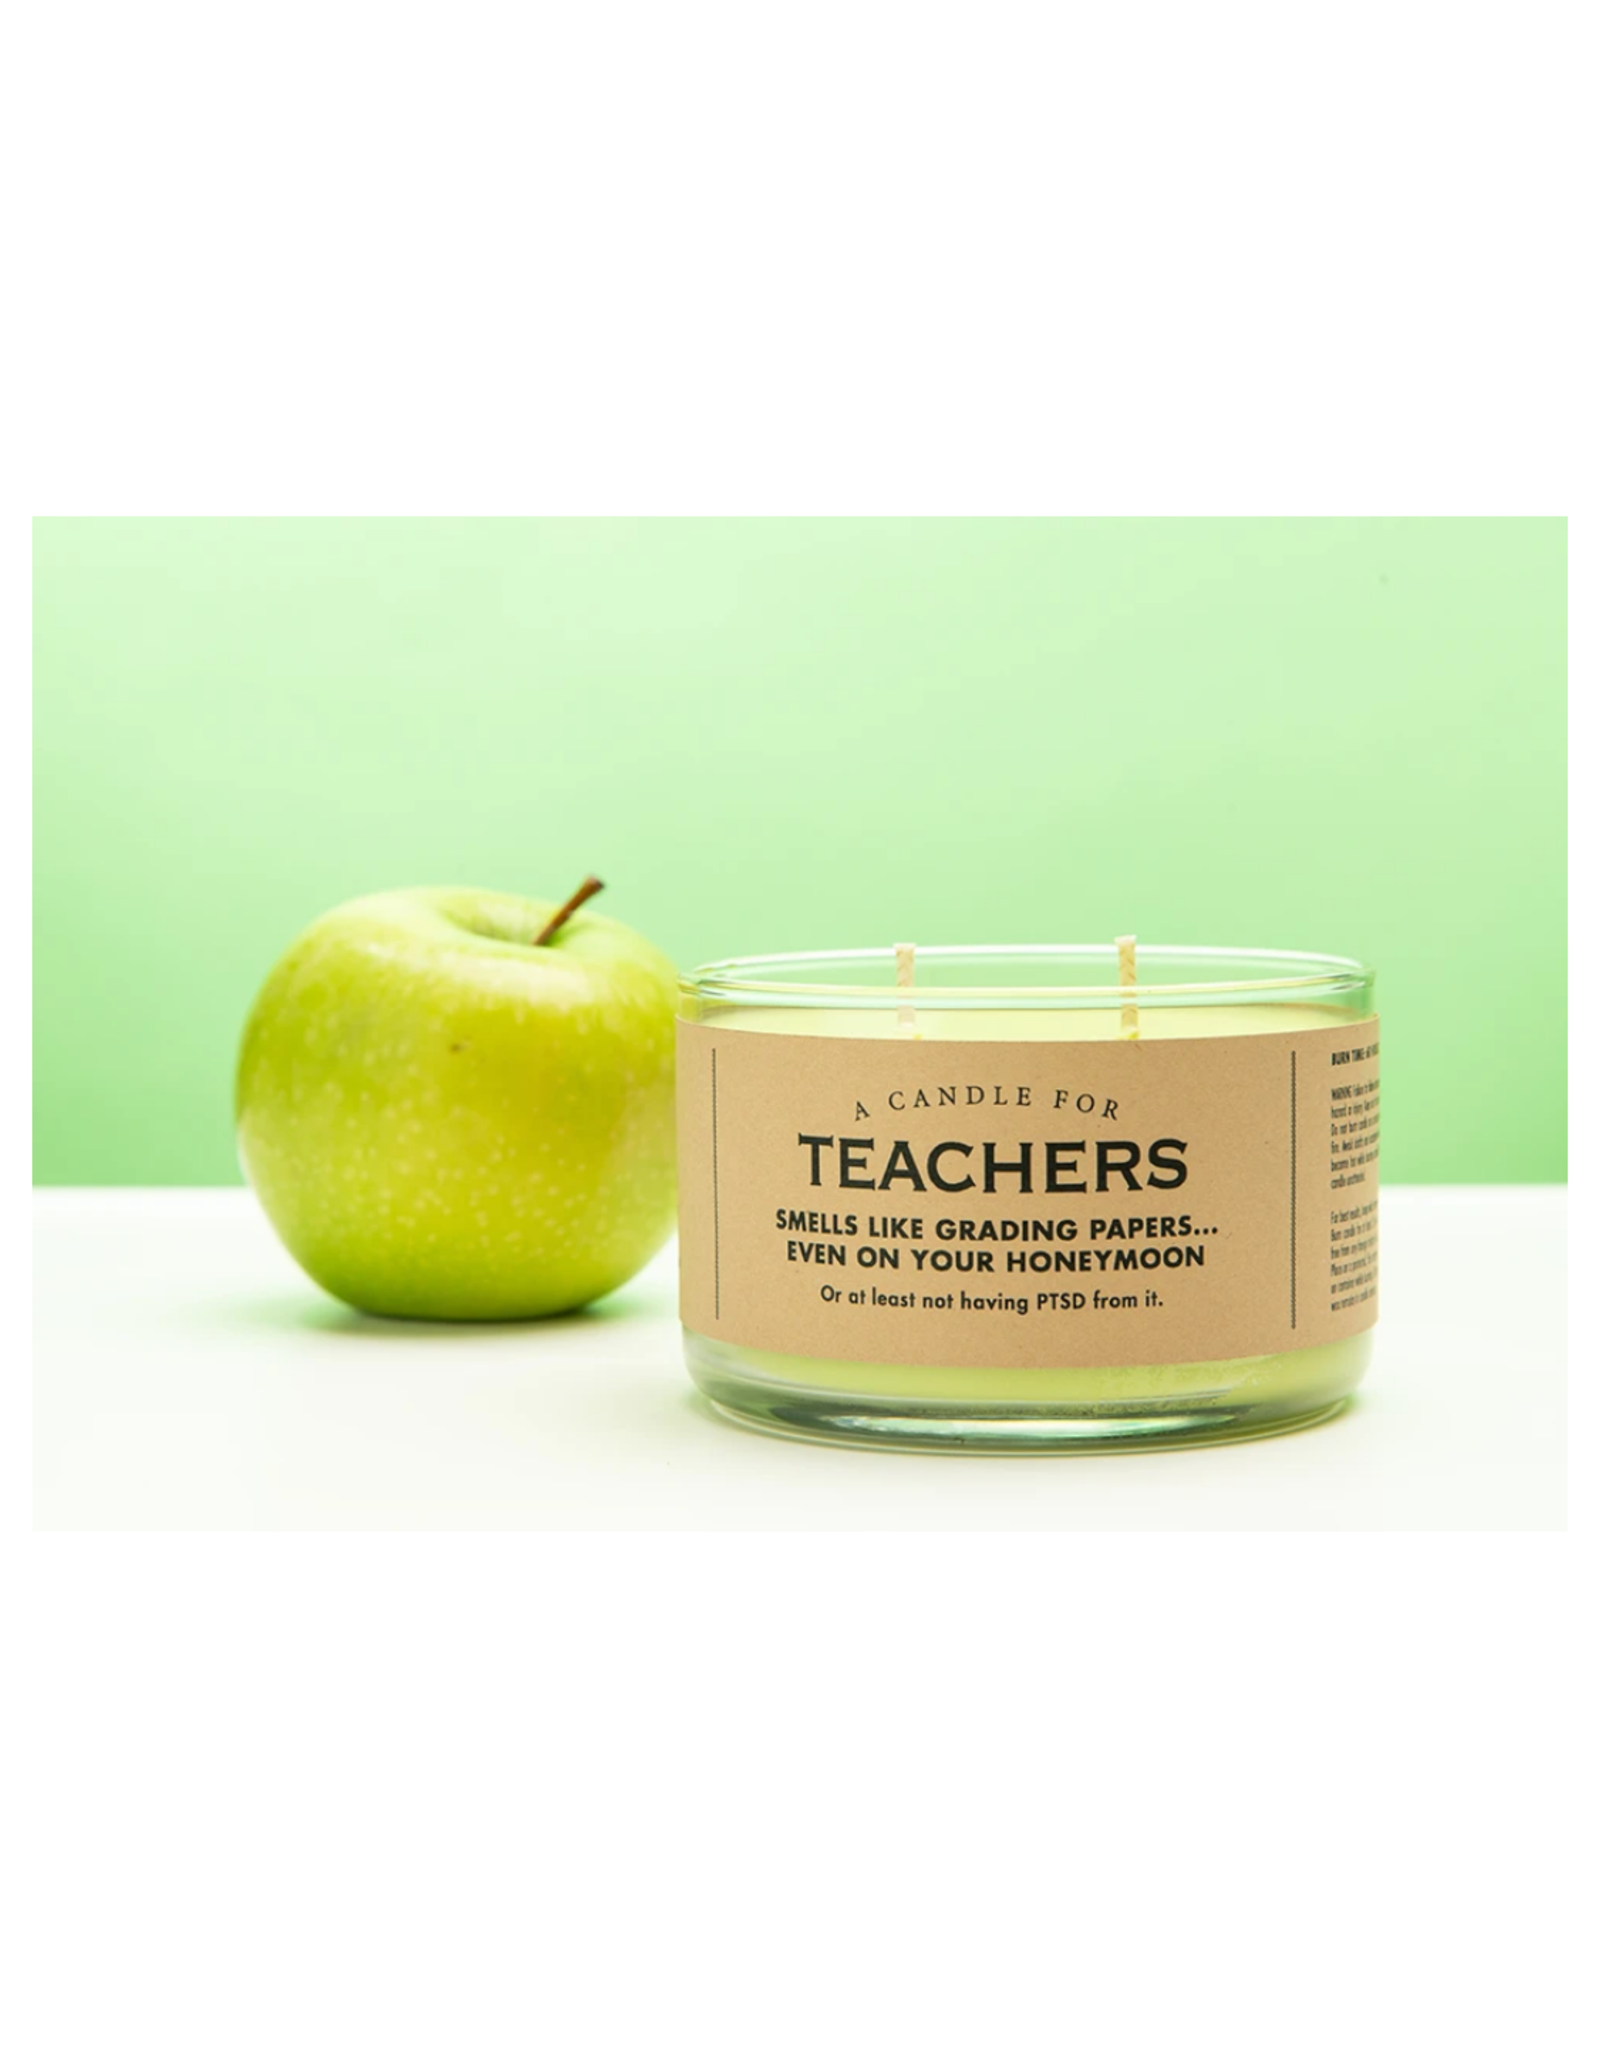 A Candle for Teachers